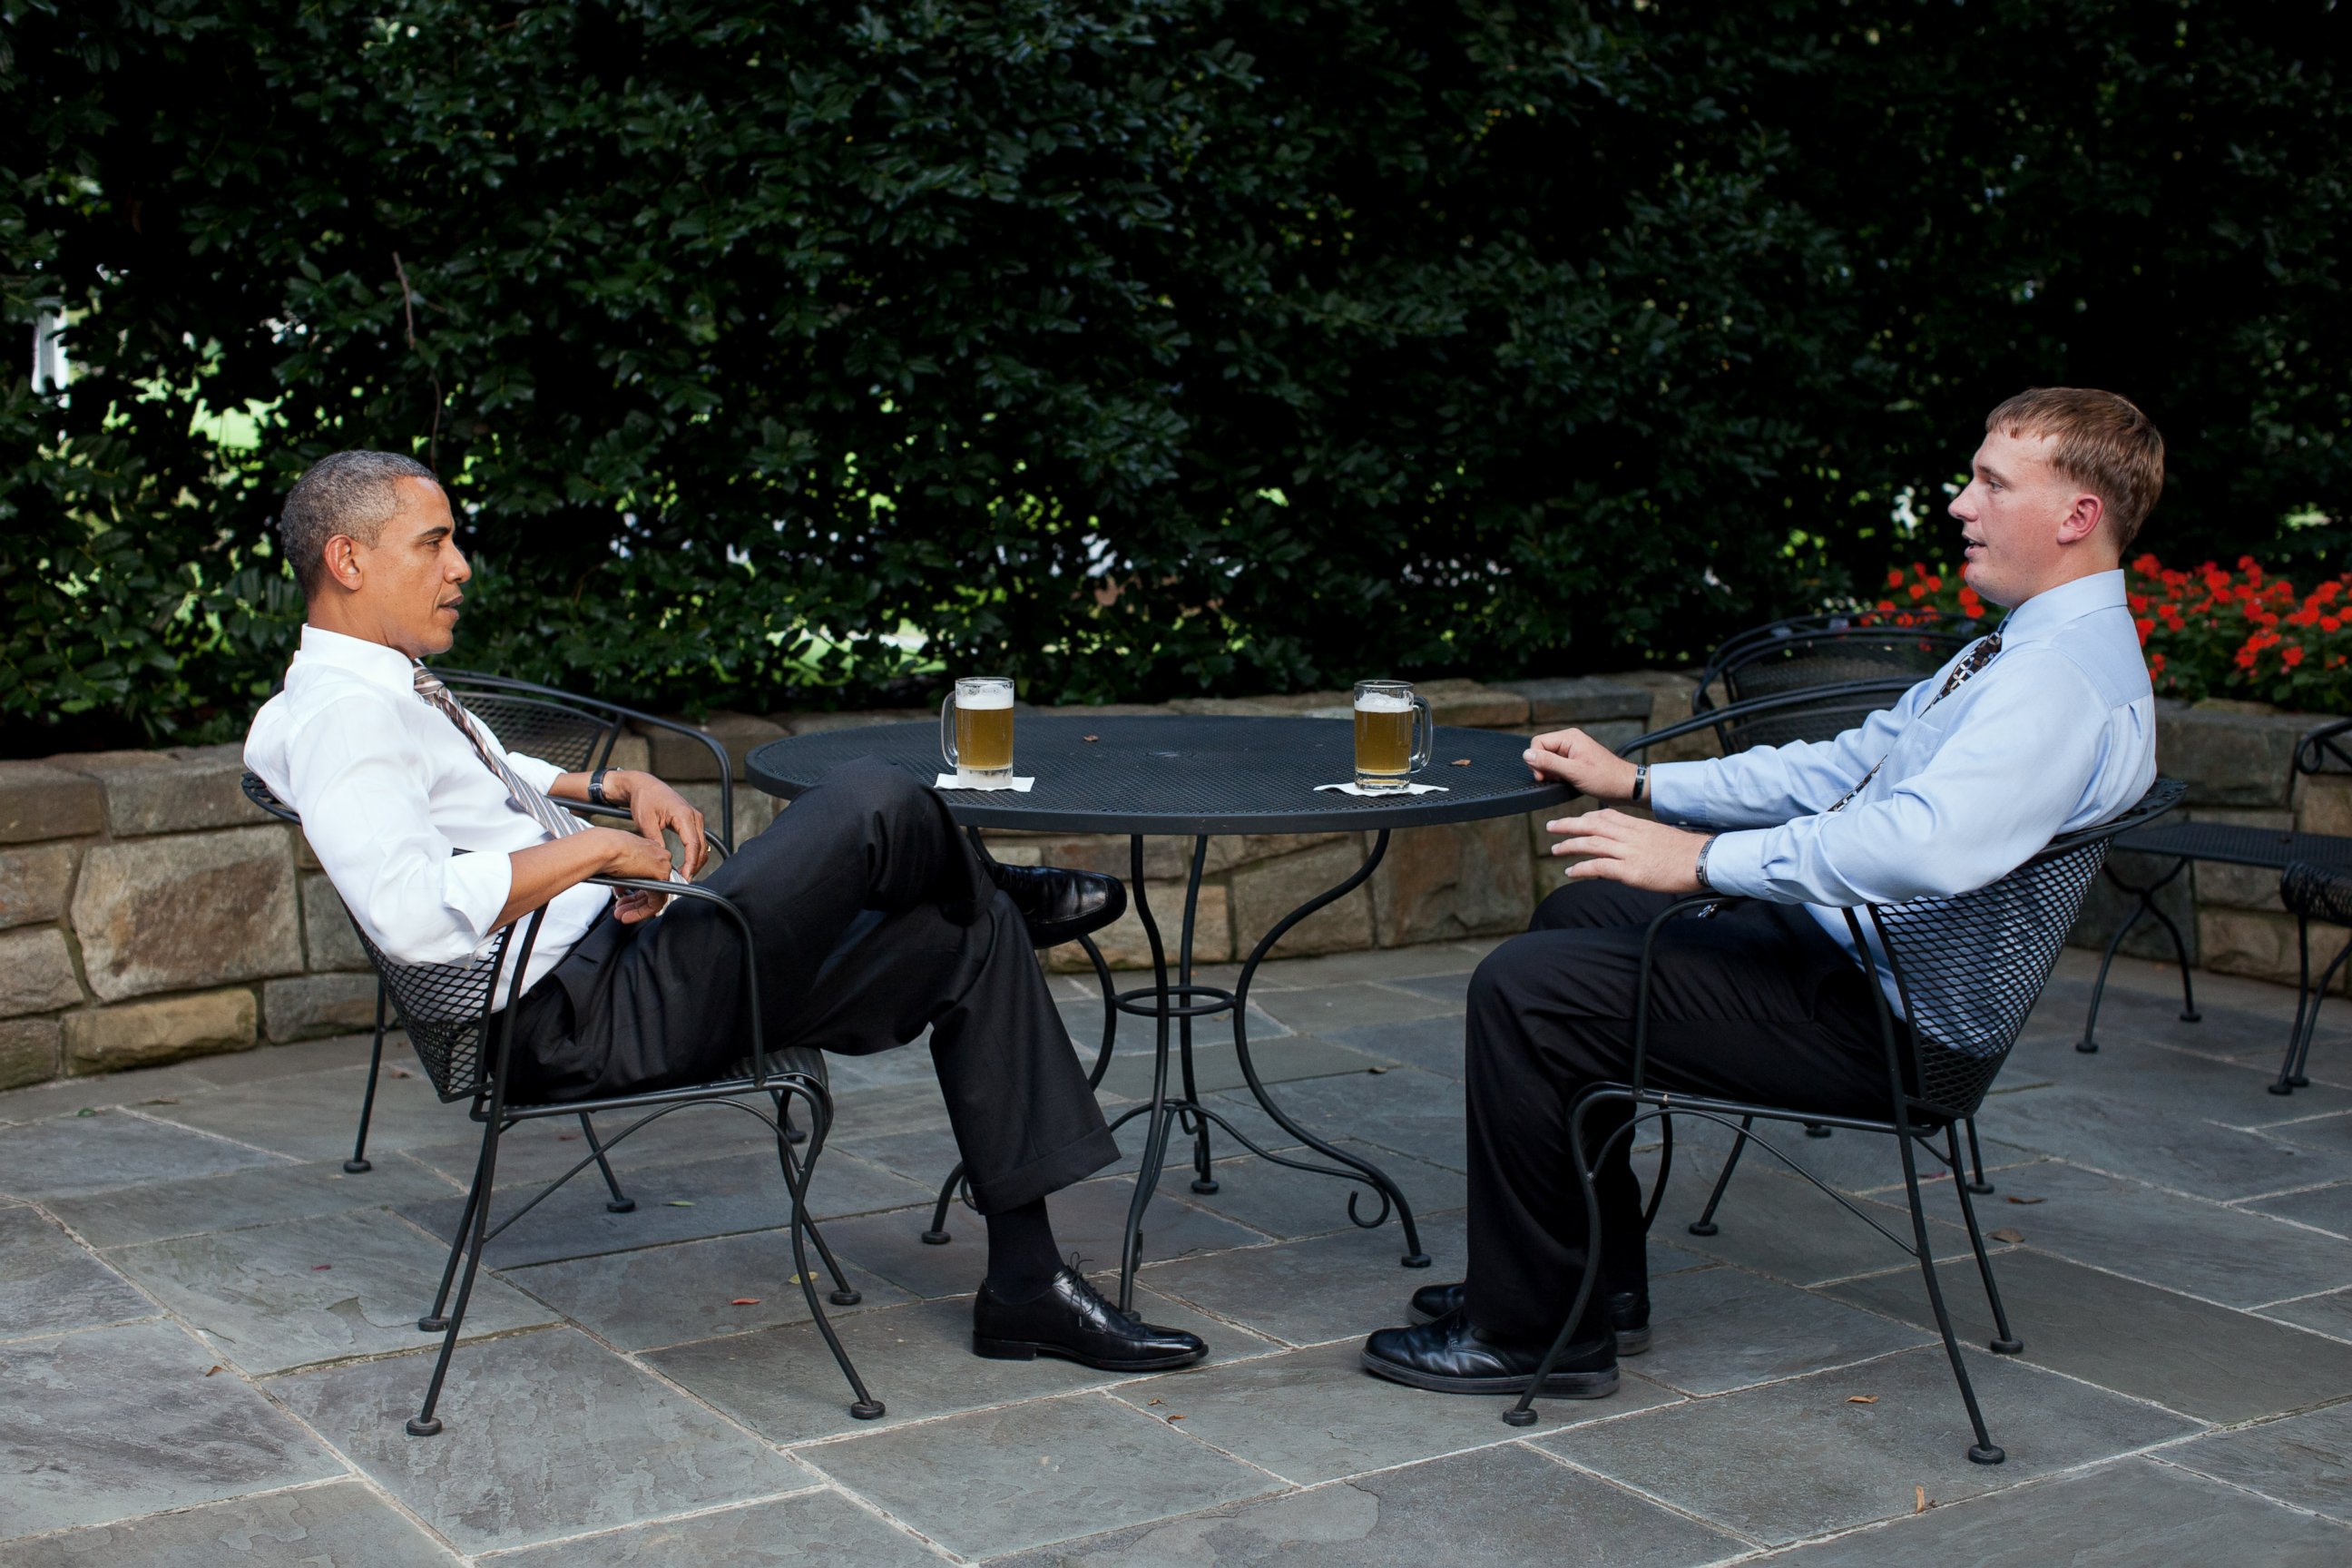 PHOTO: In this handout provided by the White House, U.S. President Barack Obama (L) enjoys a beer with Dakota Meyer on the patio outside of the Oval Office, Sept. 14, 2011 in Washington. 